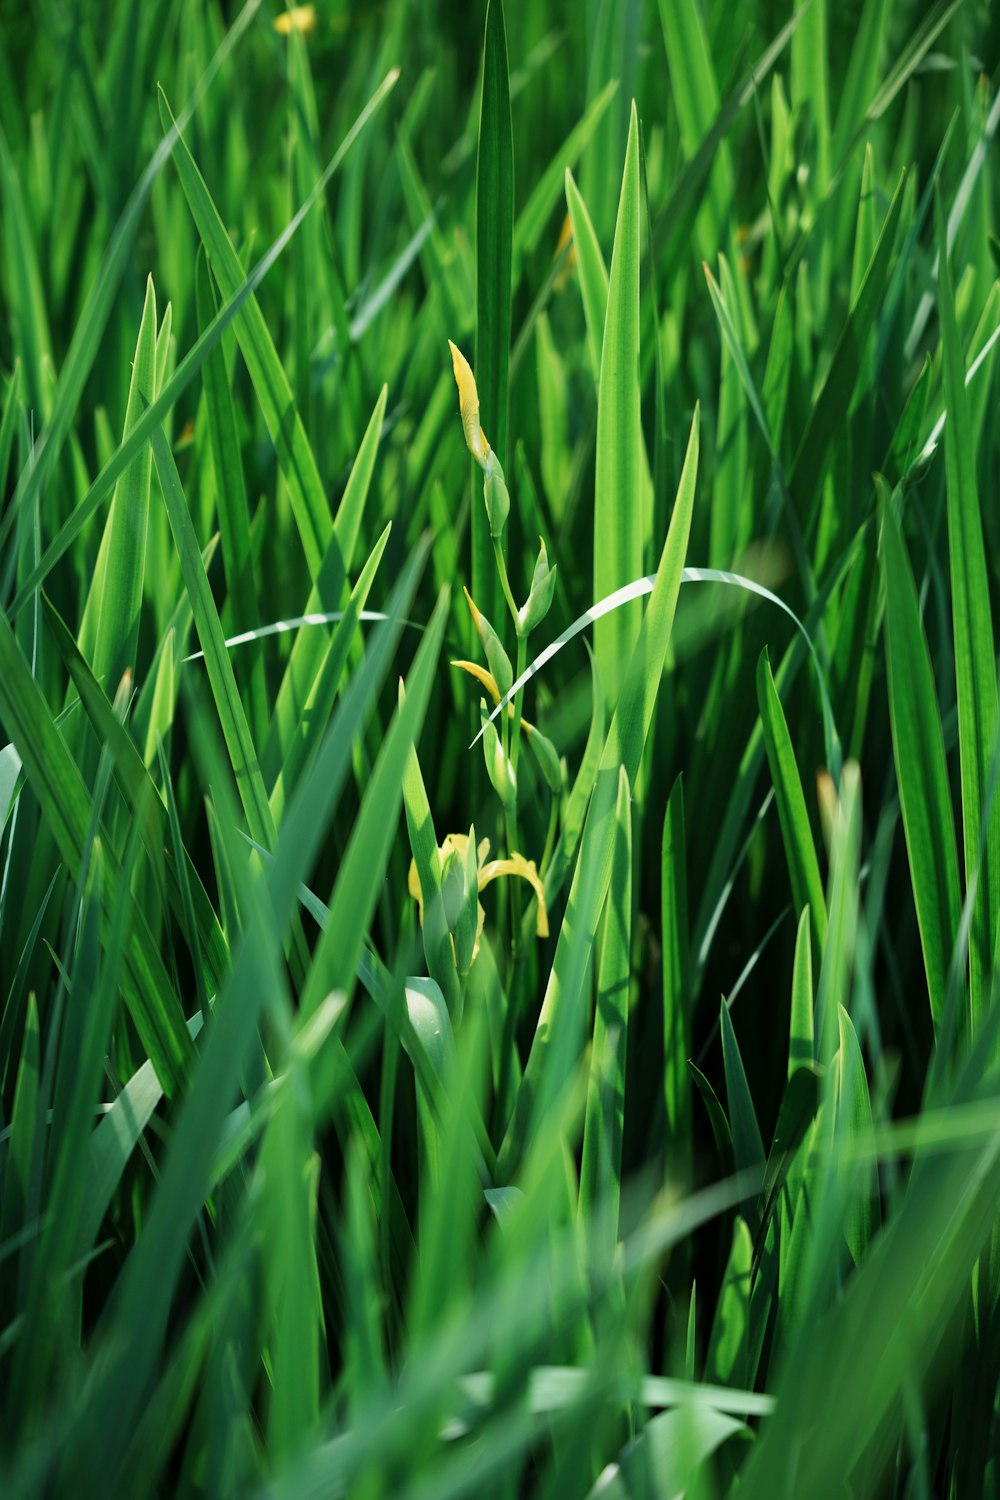 a close up of some green grass with little yellow flowers